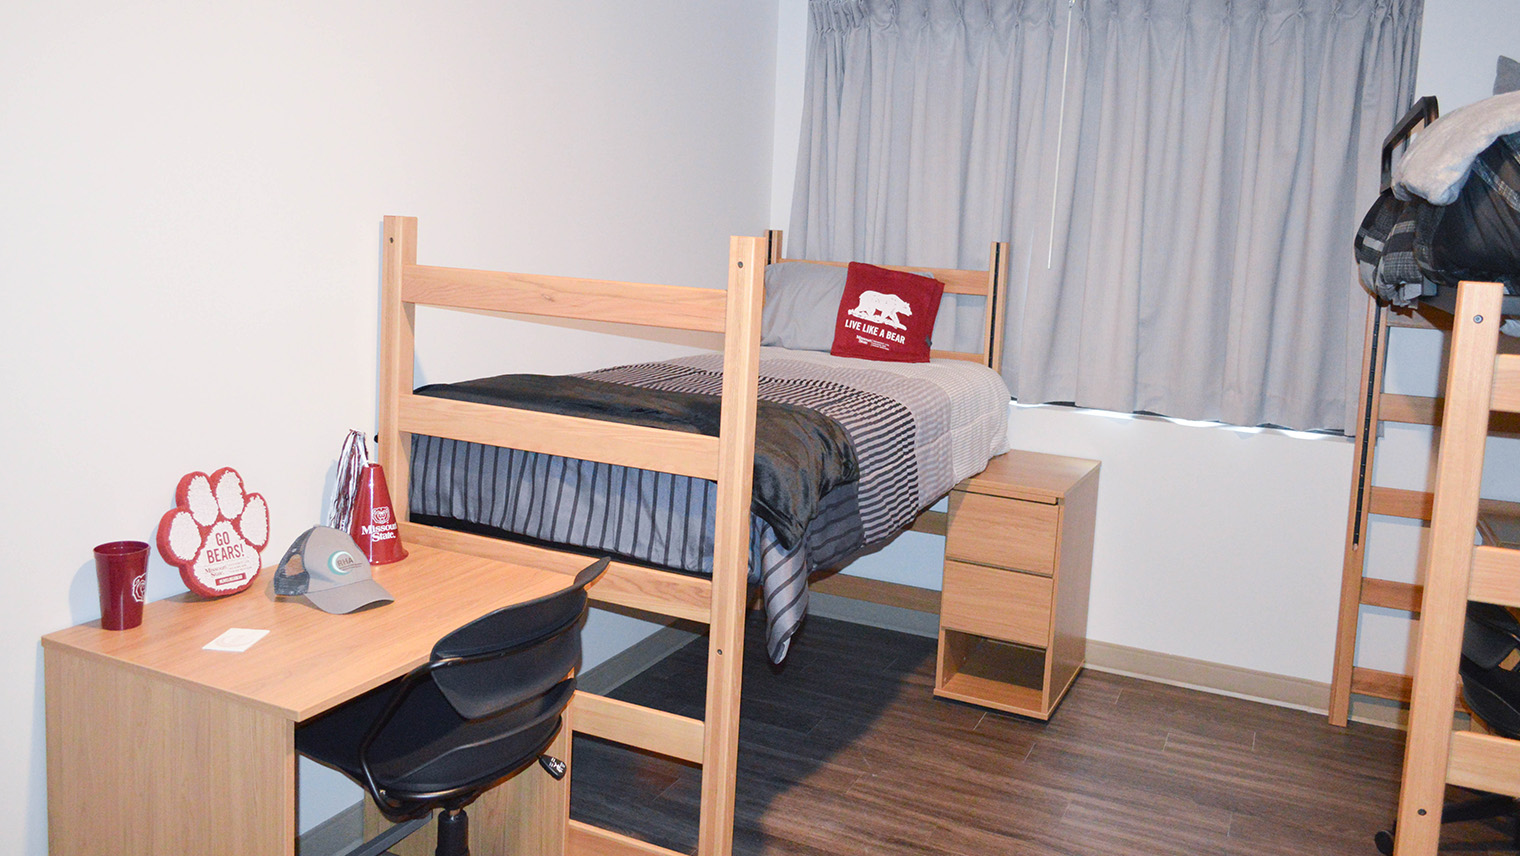 Heitz House student room with beds with adjustable height desks and chairs